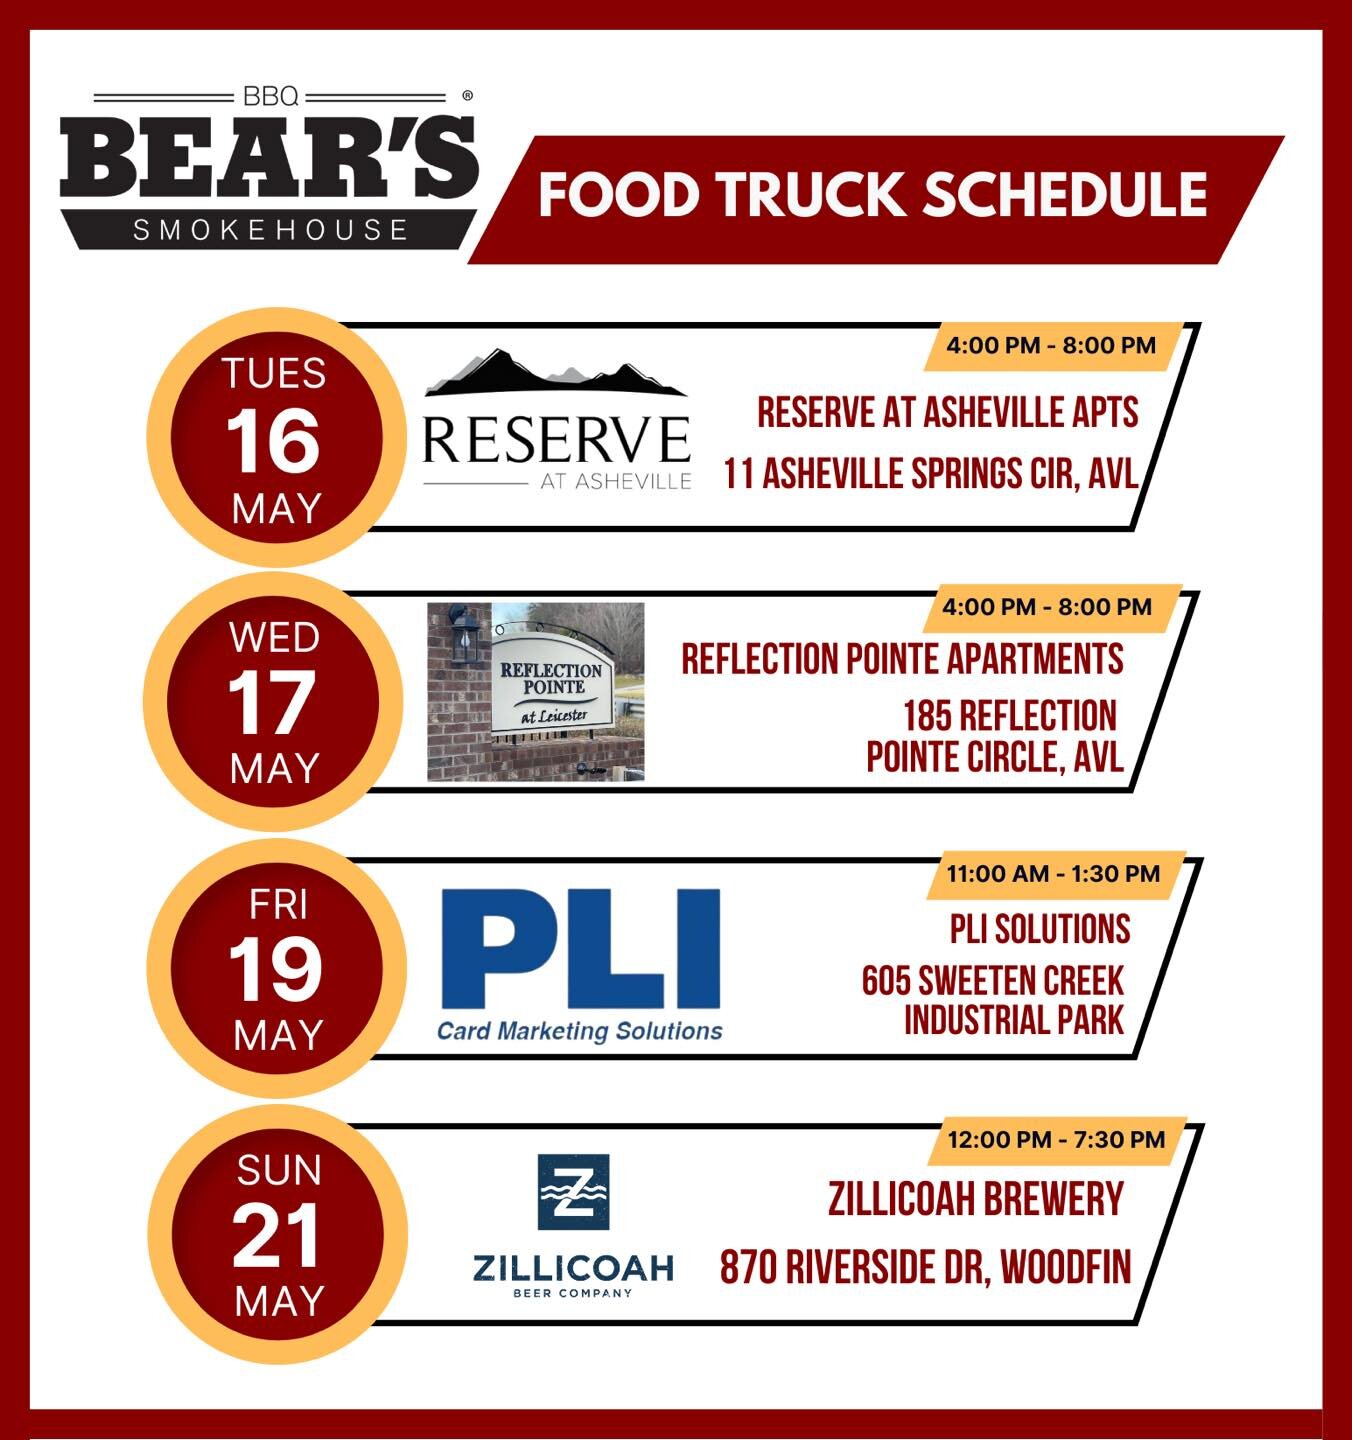 Check out all the places you can find us this week! We&rsquo;ll be slinging BBQ all over WNC, including Asheville Downtown Association&rsquo;s Downtown After 5 and WNC Bigfoot Festival!
#ashevillefoodtrucks #ashevillefoodiecommunity #ashevillenc